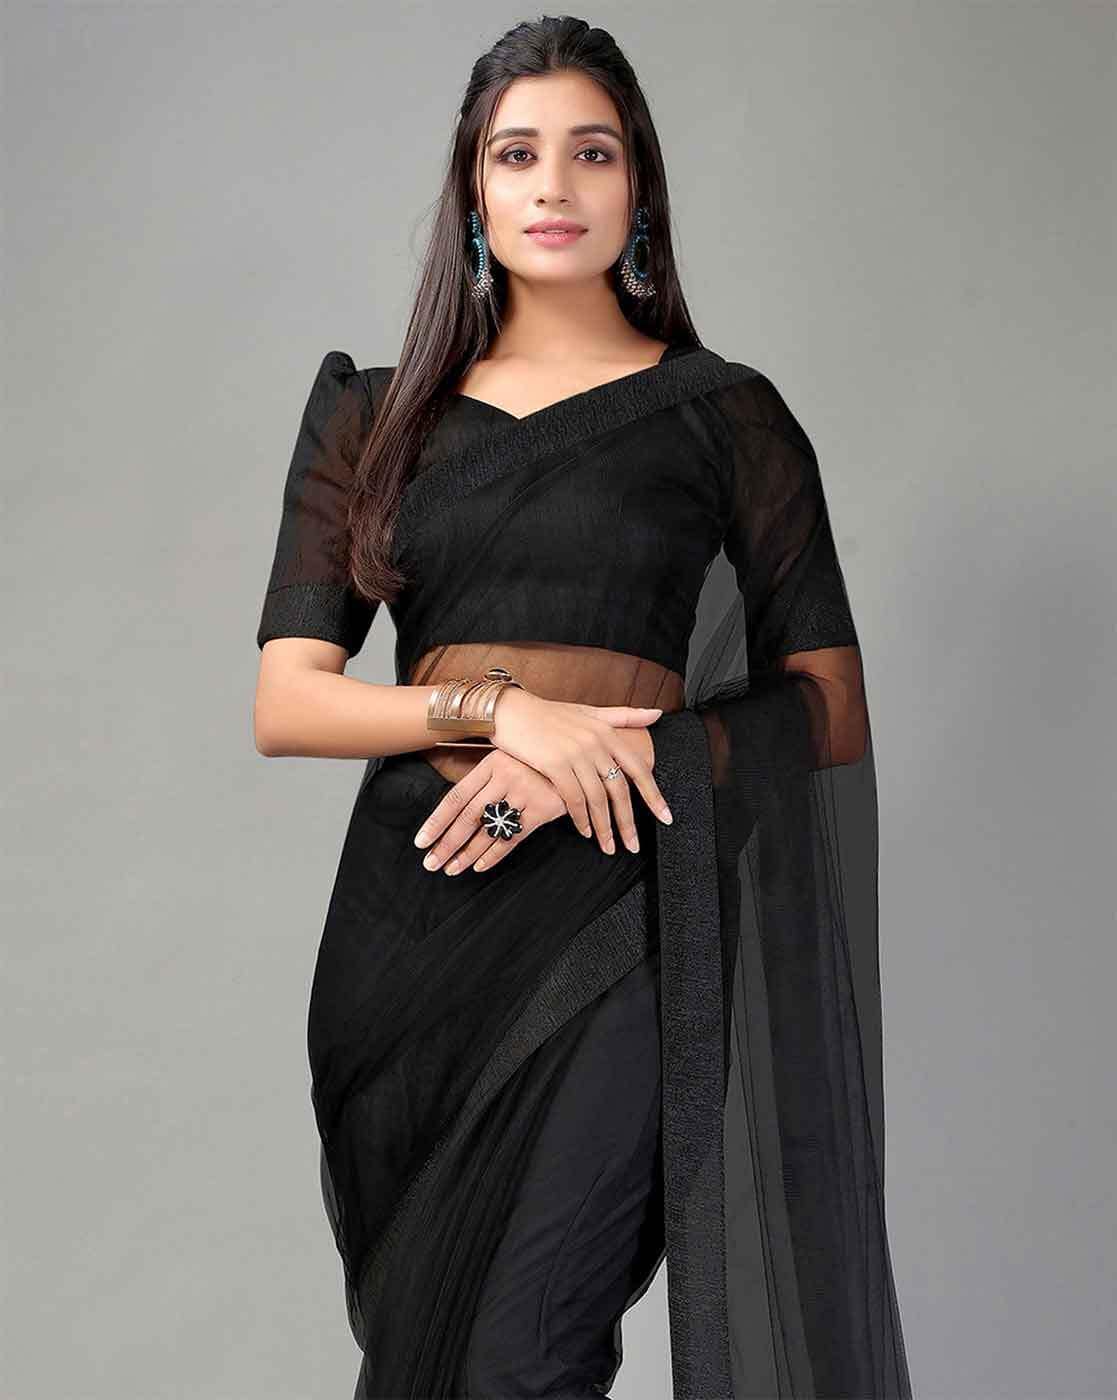 How to look when you dress up a black saree - Quora